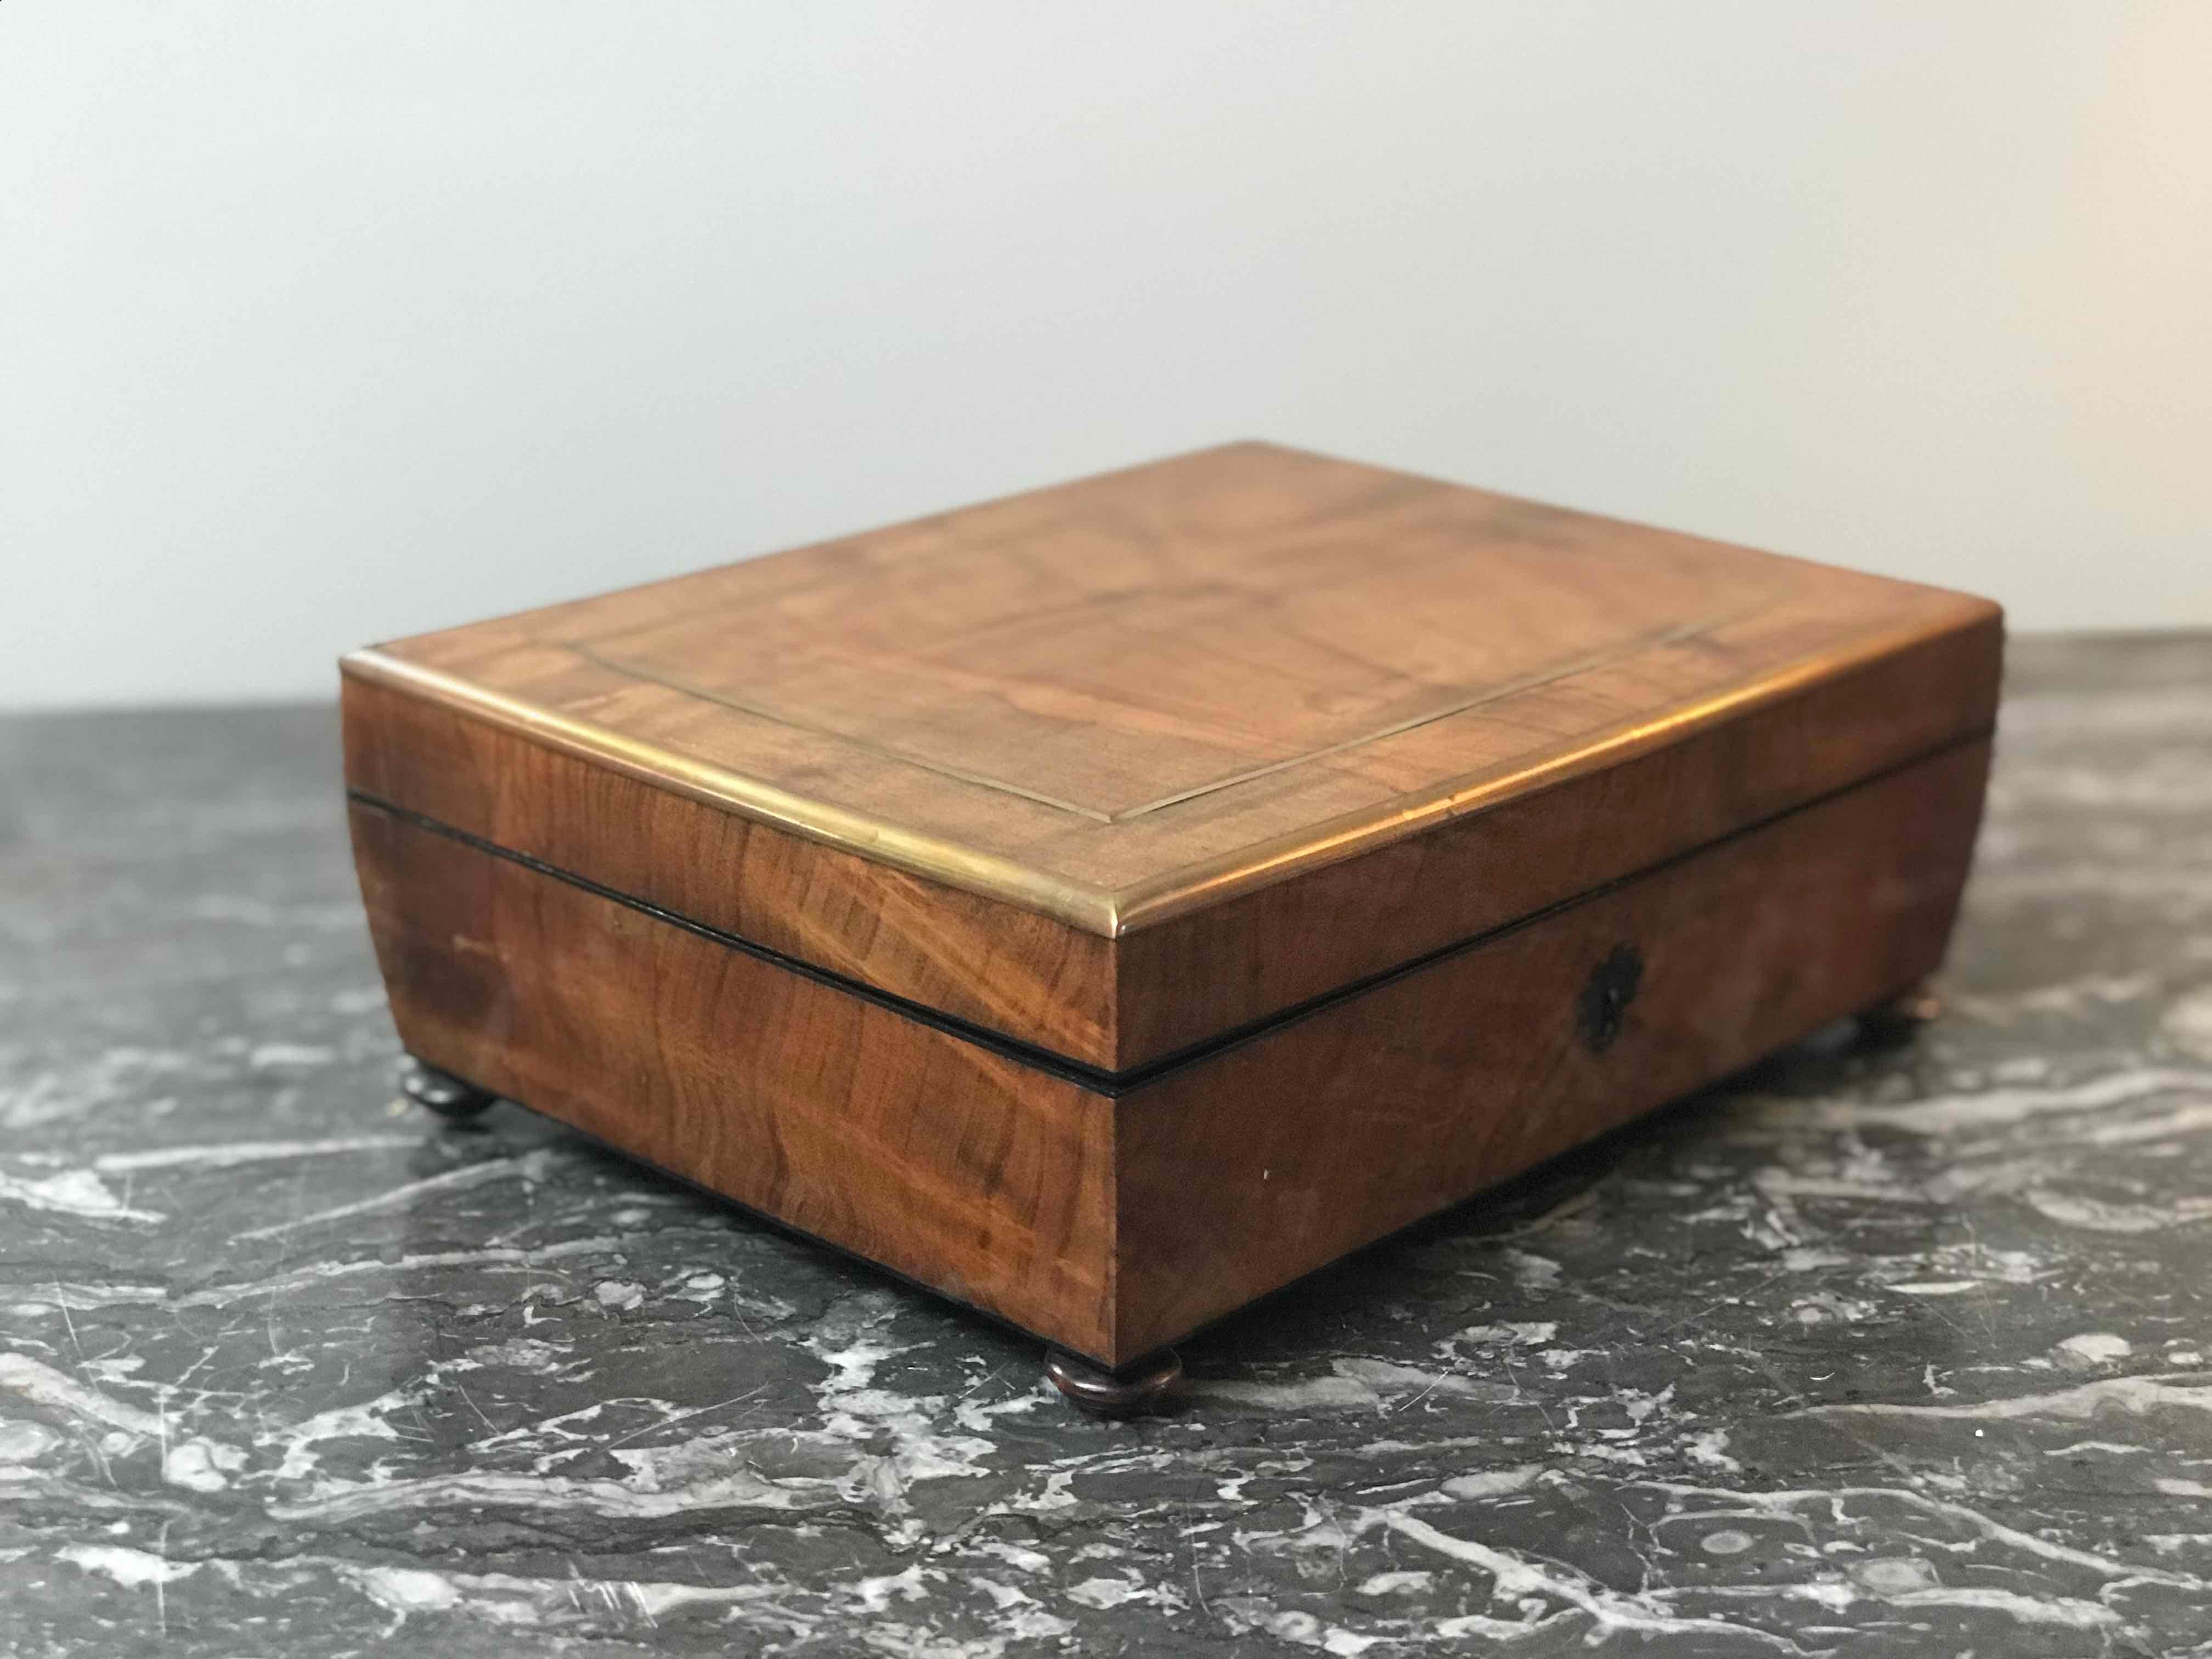 Early Victorian Olive Wood Brass Inlaid Box from Mid-19th Century England